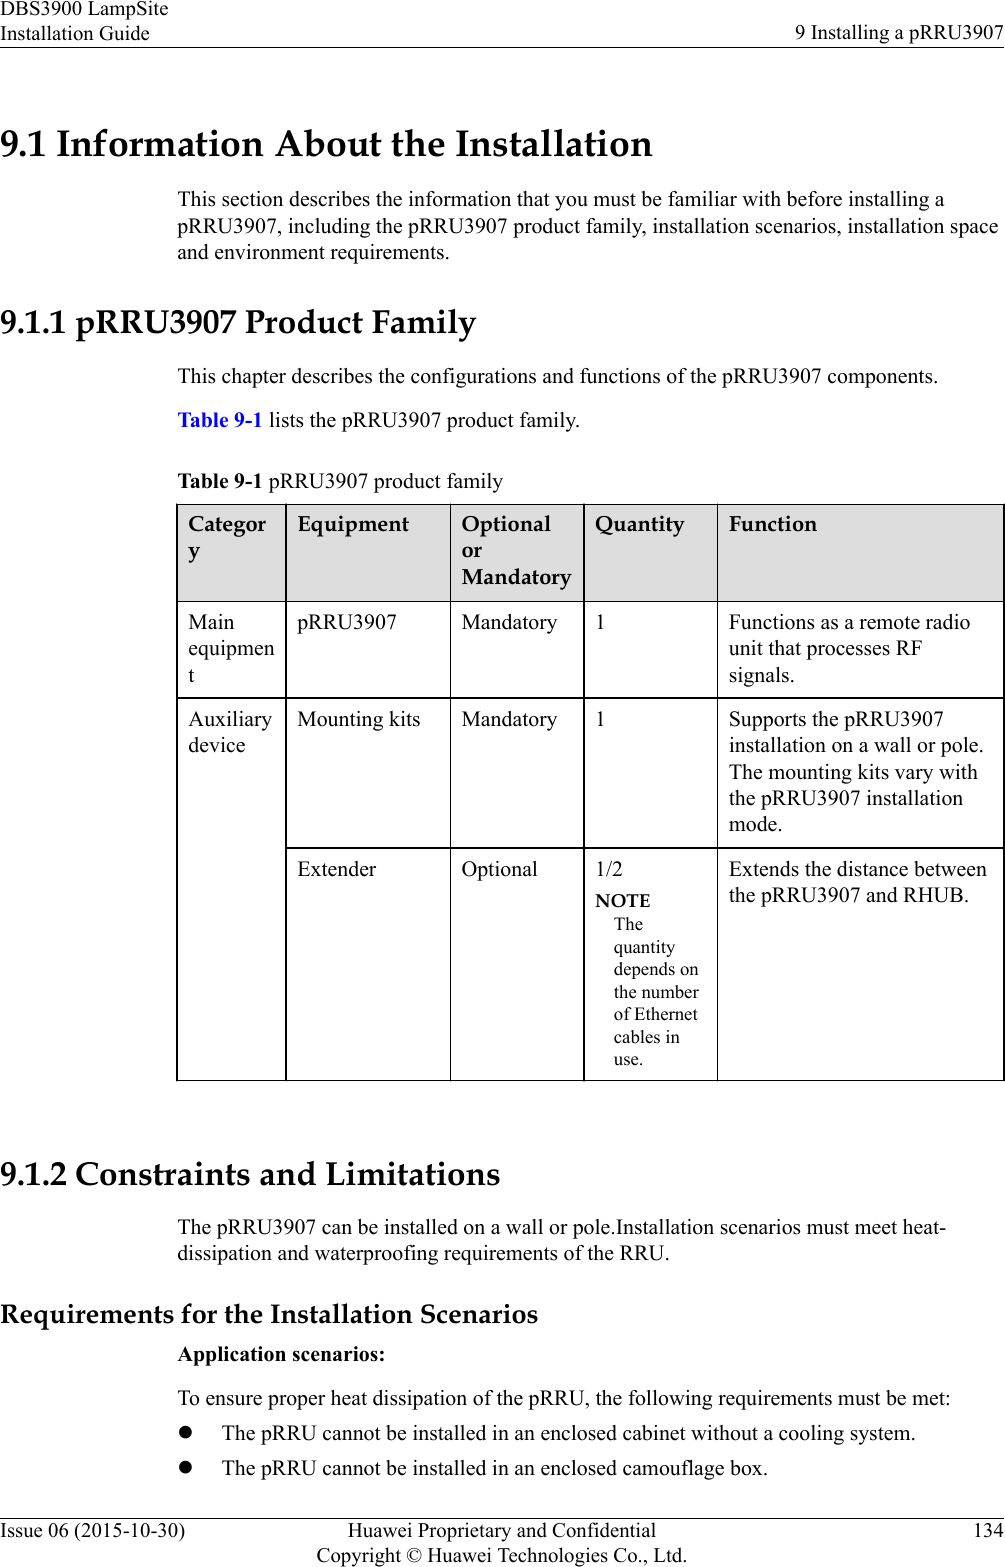 9.1 Information About the InstallationThis section describes the information that you must be familiar with before installing apRRU3907, including the pRRU3907 product family, installation scenarios, installation spaceand environment requirements.9.1.1 pRRU3907 Product FamilyThis chapter describes the configurations and functions of the pRRU3907 components.Table 9-1 lists the pRRU3907 product family.Table 9-1 pRRU3907 product familyCategoryEquipment OptionalorMandatoryQuantity FunctionMainequipmentpRRU3907 Mandatory 1 Functions as a remote radiounit that processes RFsignals.AuxiliarydeviceMounting kits Mandatory 1 Supports the pRRU3907installation on a wall or pole.The mounting kits vary withthe pRRU3907 installationmode.Extender Optional 1/2NOTEThequantitydepends onthe numberof Ethernetcables inuse.Extends the distance betweenthe pRRU3907 and RHUB. 9.1.2 Constraints and LimitationsThe pRRU3907 can be installed on a wall or pole.Installation scenarios must meet heat-dissipation and waterproofing requirements of the RRU.Requirements for the Installation ScenariosApplication scenarios:To ensure proper heat dissipation of the pRRU, the following requirements must be met:lThe pRRU cannot be installed in an enclosed cabinet without a cooling system.lThe pRRU cannot be installed in an enclosed camouflage box.DBS3900 LampSiteInstallation Guide 9 Installing a pRRU3907Issue 06 (2015-10-30) Huawei Proprietary and ConfidentialCopyright © Huawei Technologies Co., Ltd.134